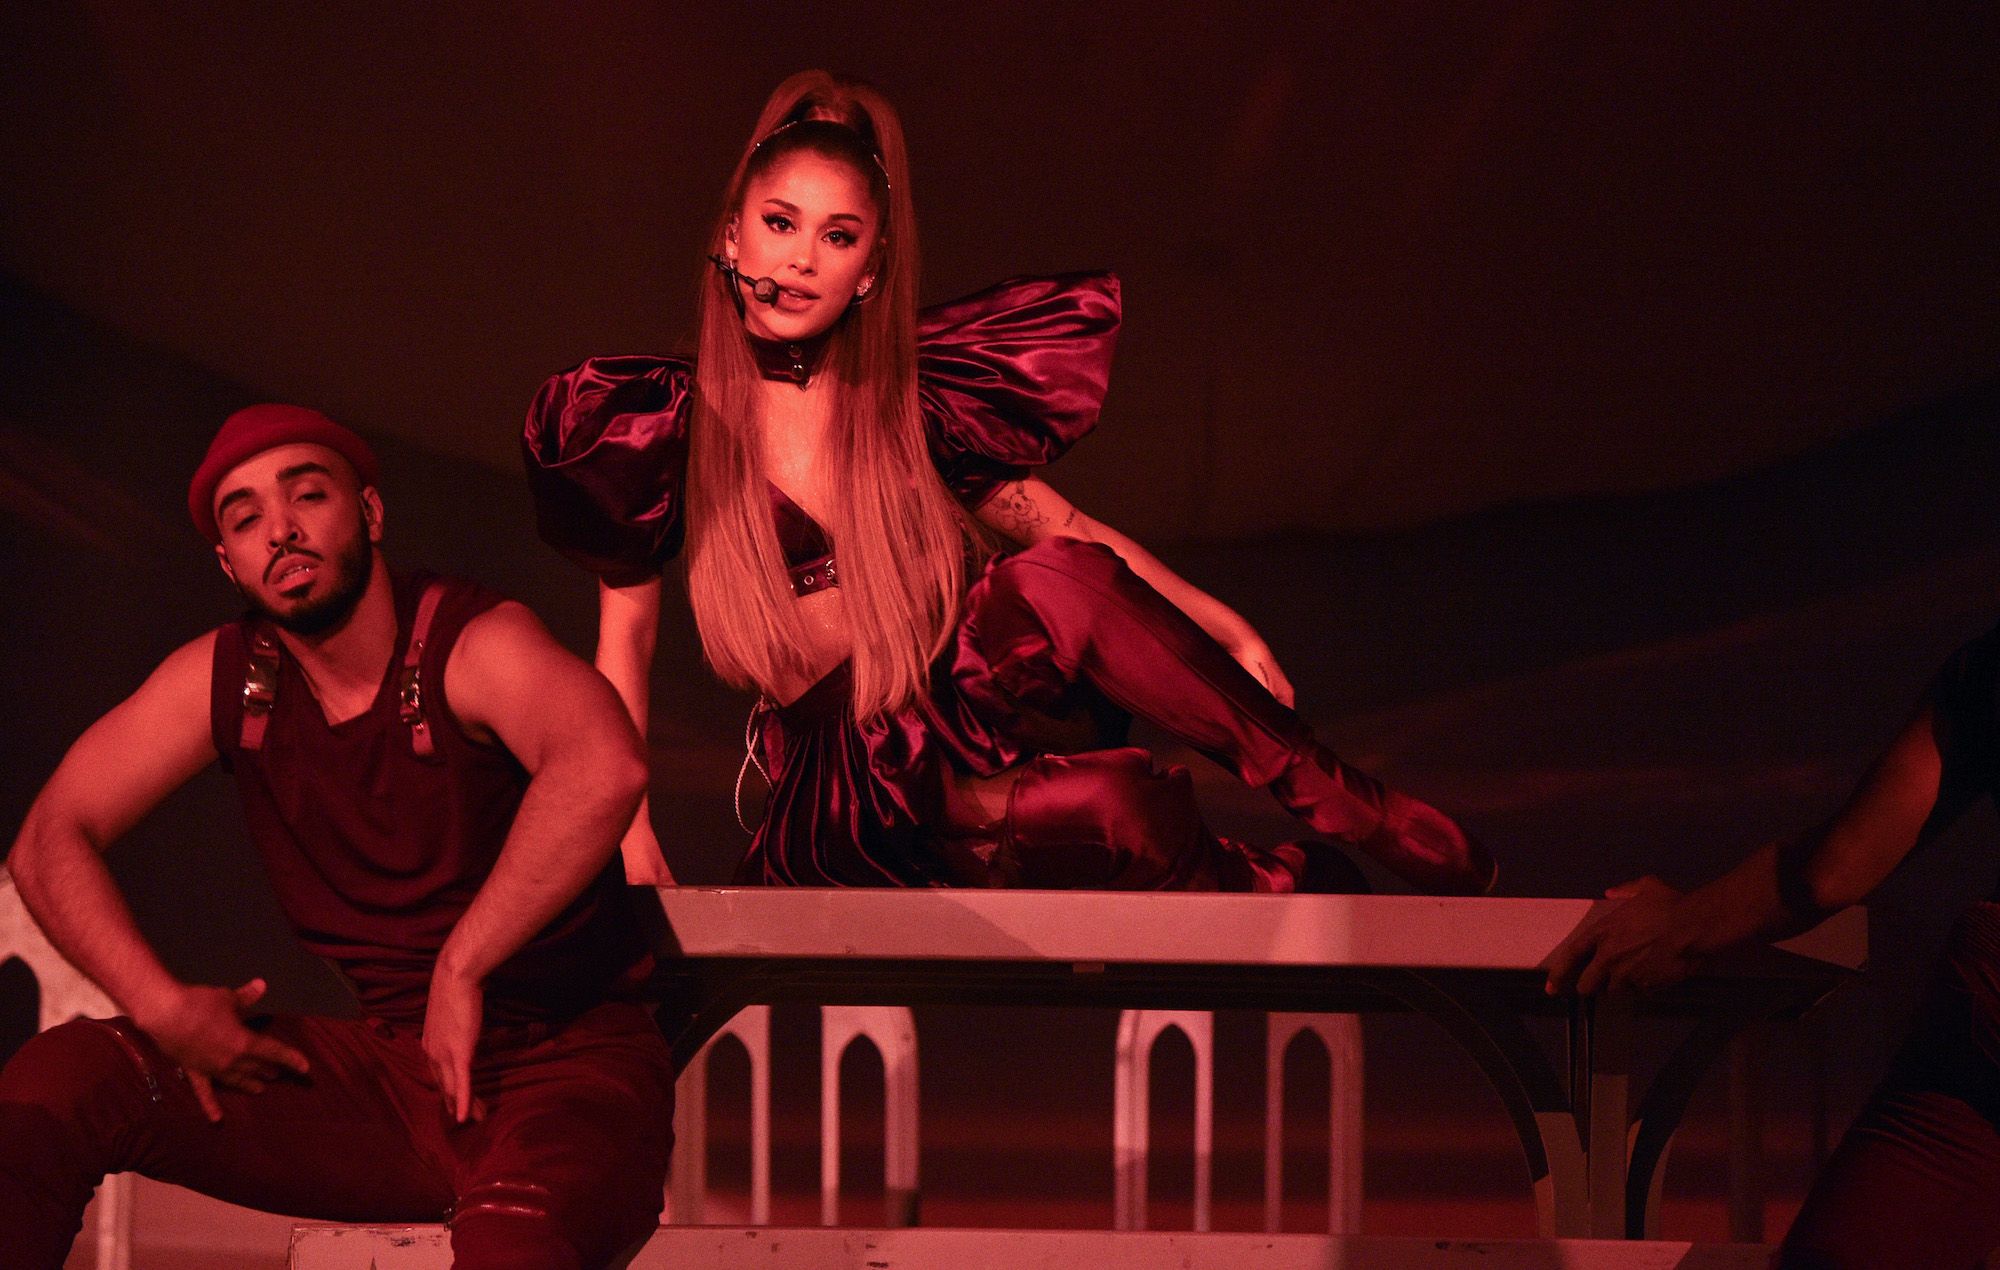 Ariana Grande no longer facing lawsuit over 'God Is A Woman' video